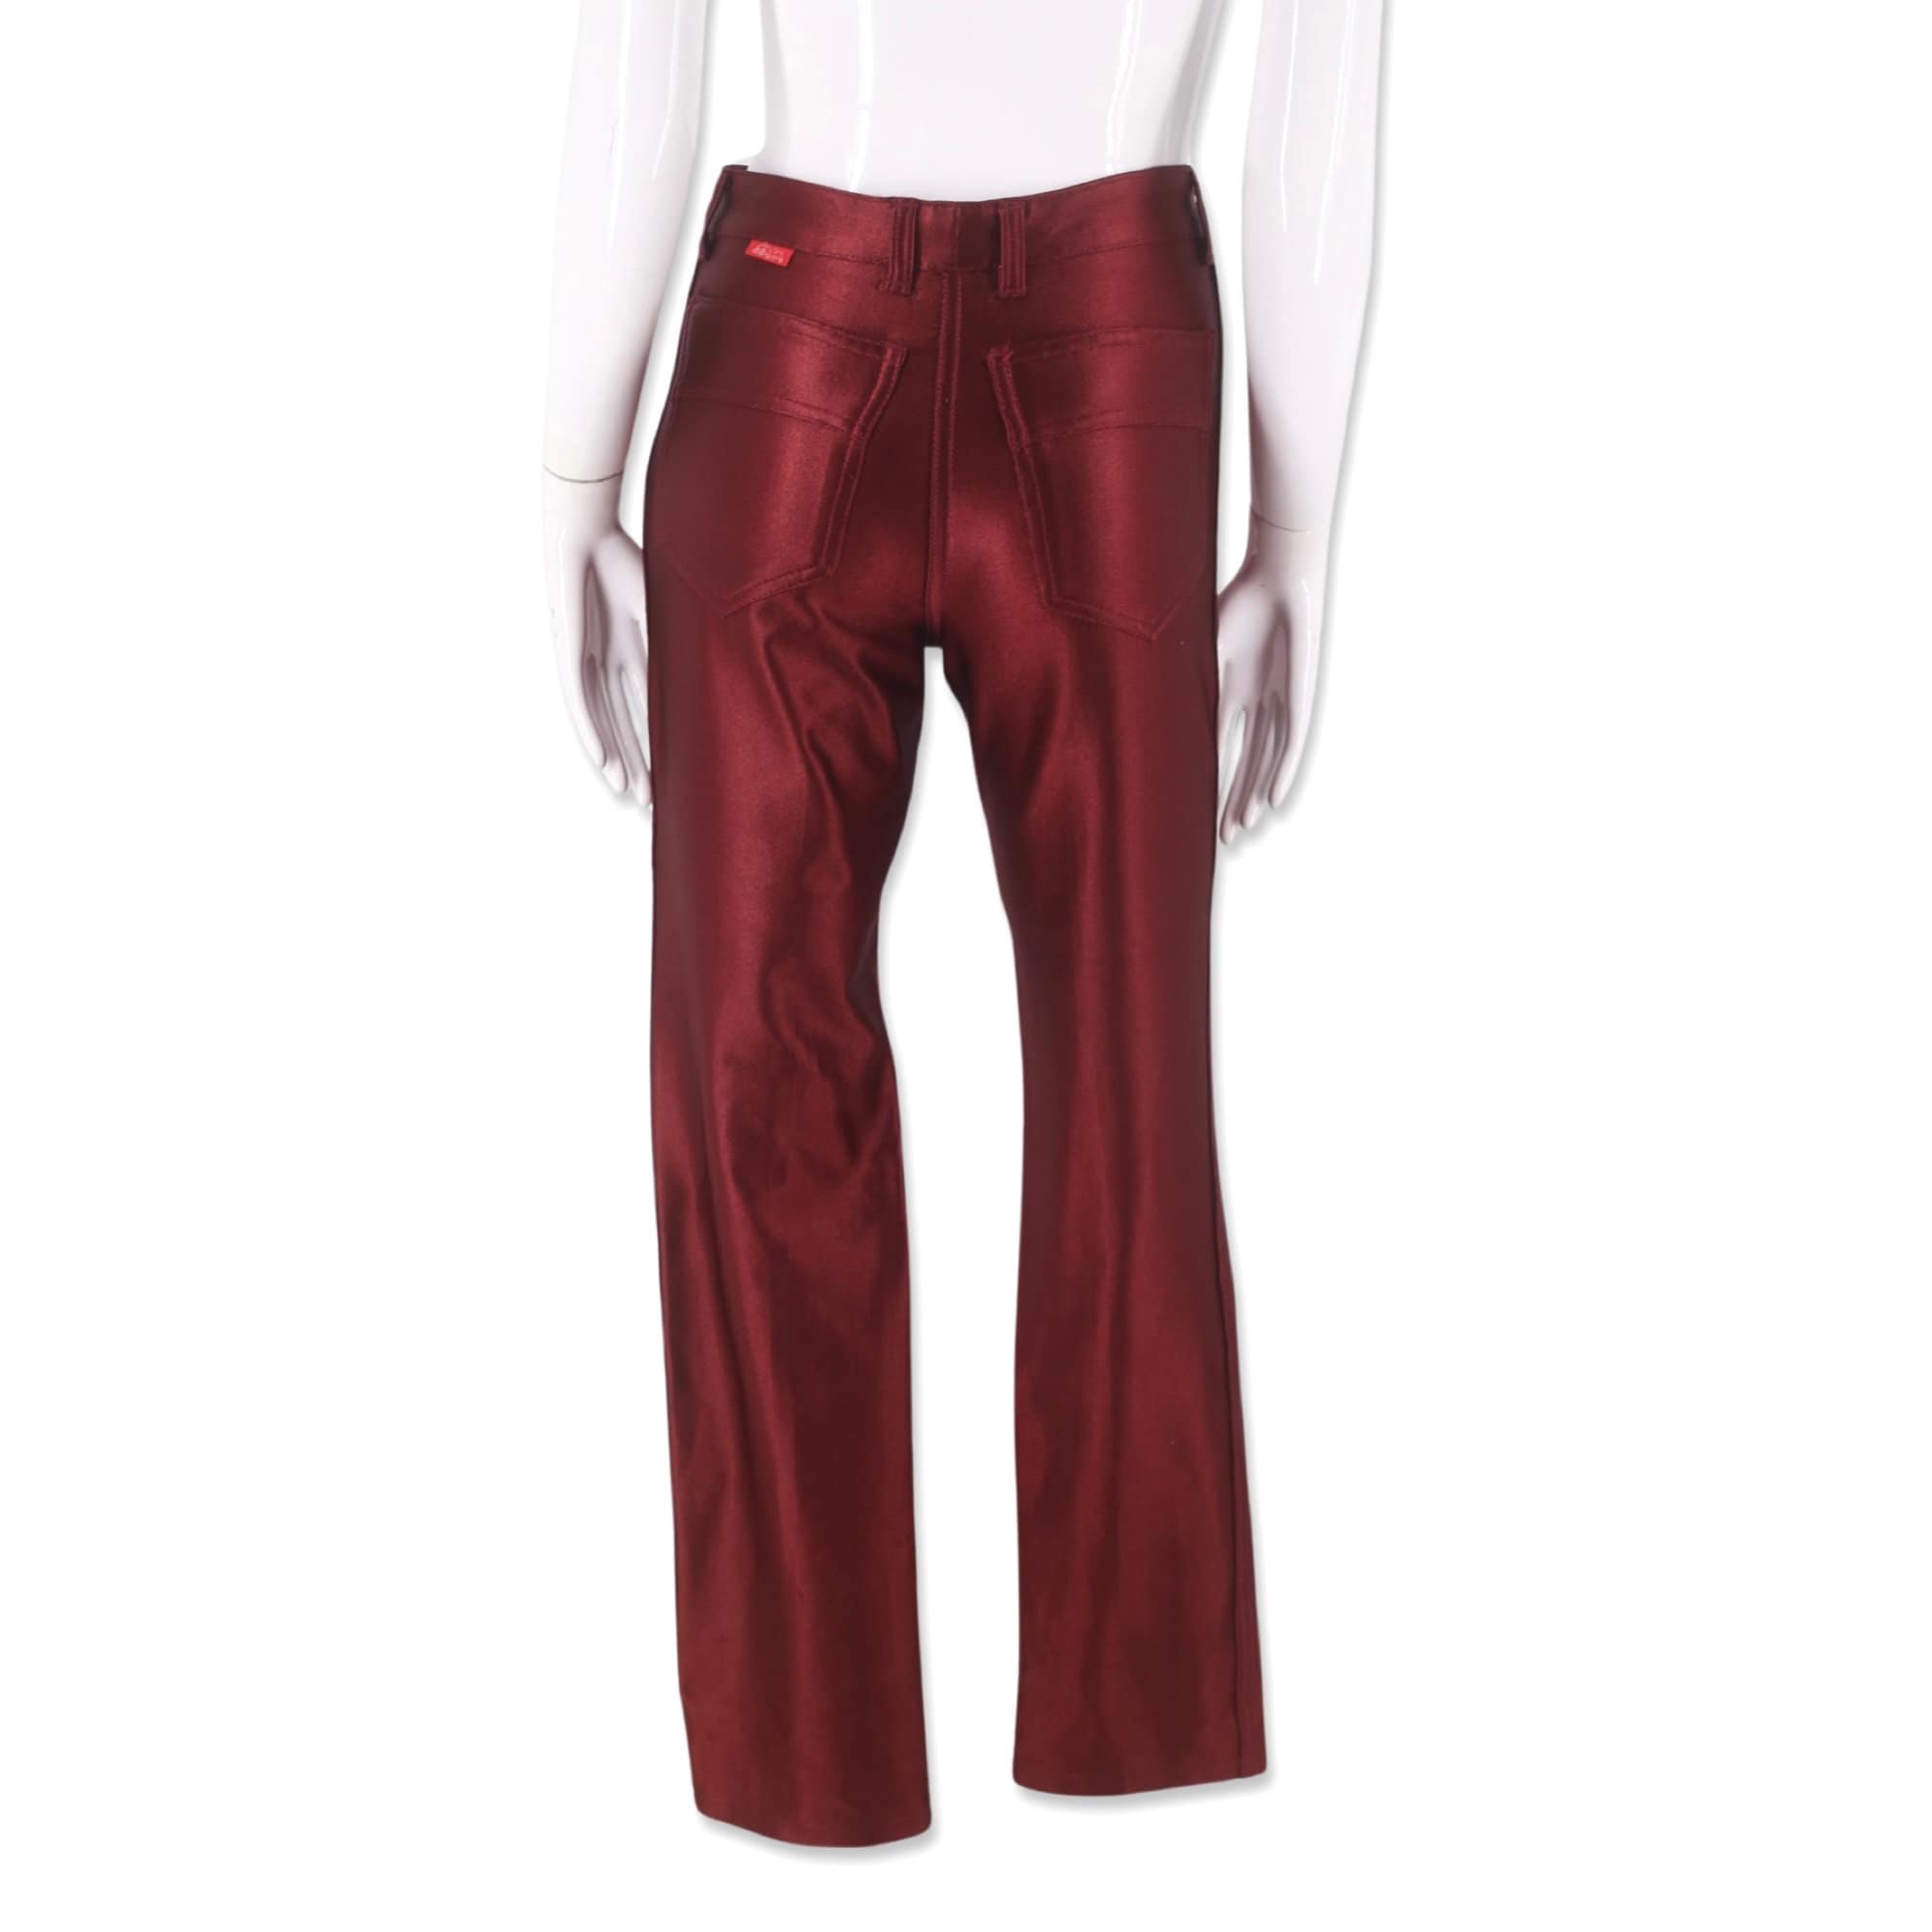 Deadstock 70s Disco Pants. the Real Deal in True Red. Embroidered Back  Pockets. Extra Long. by Viceroy. 29 X 35 -  Canada